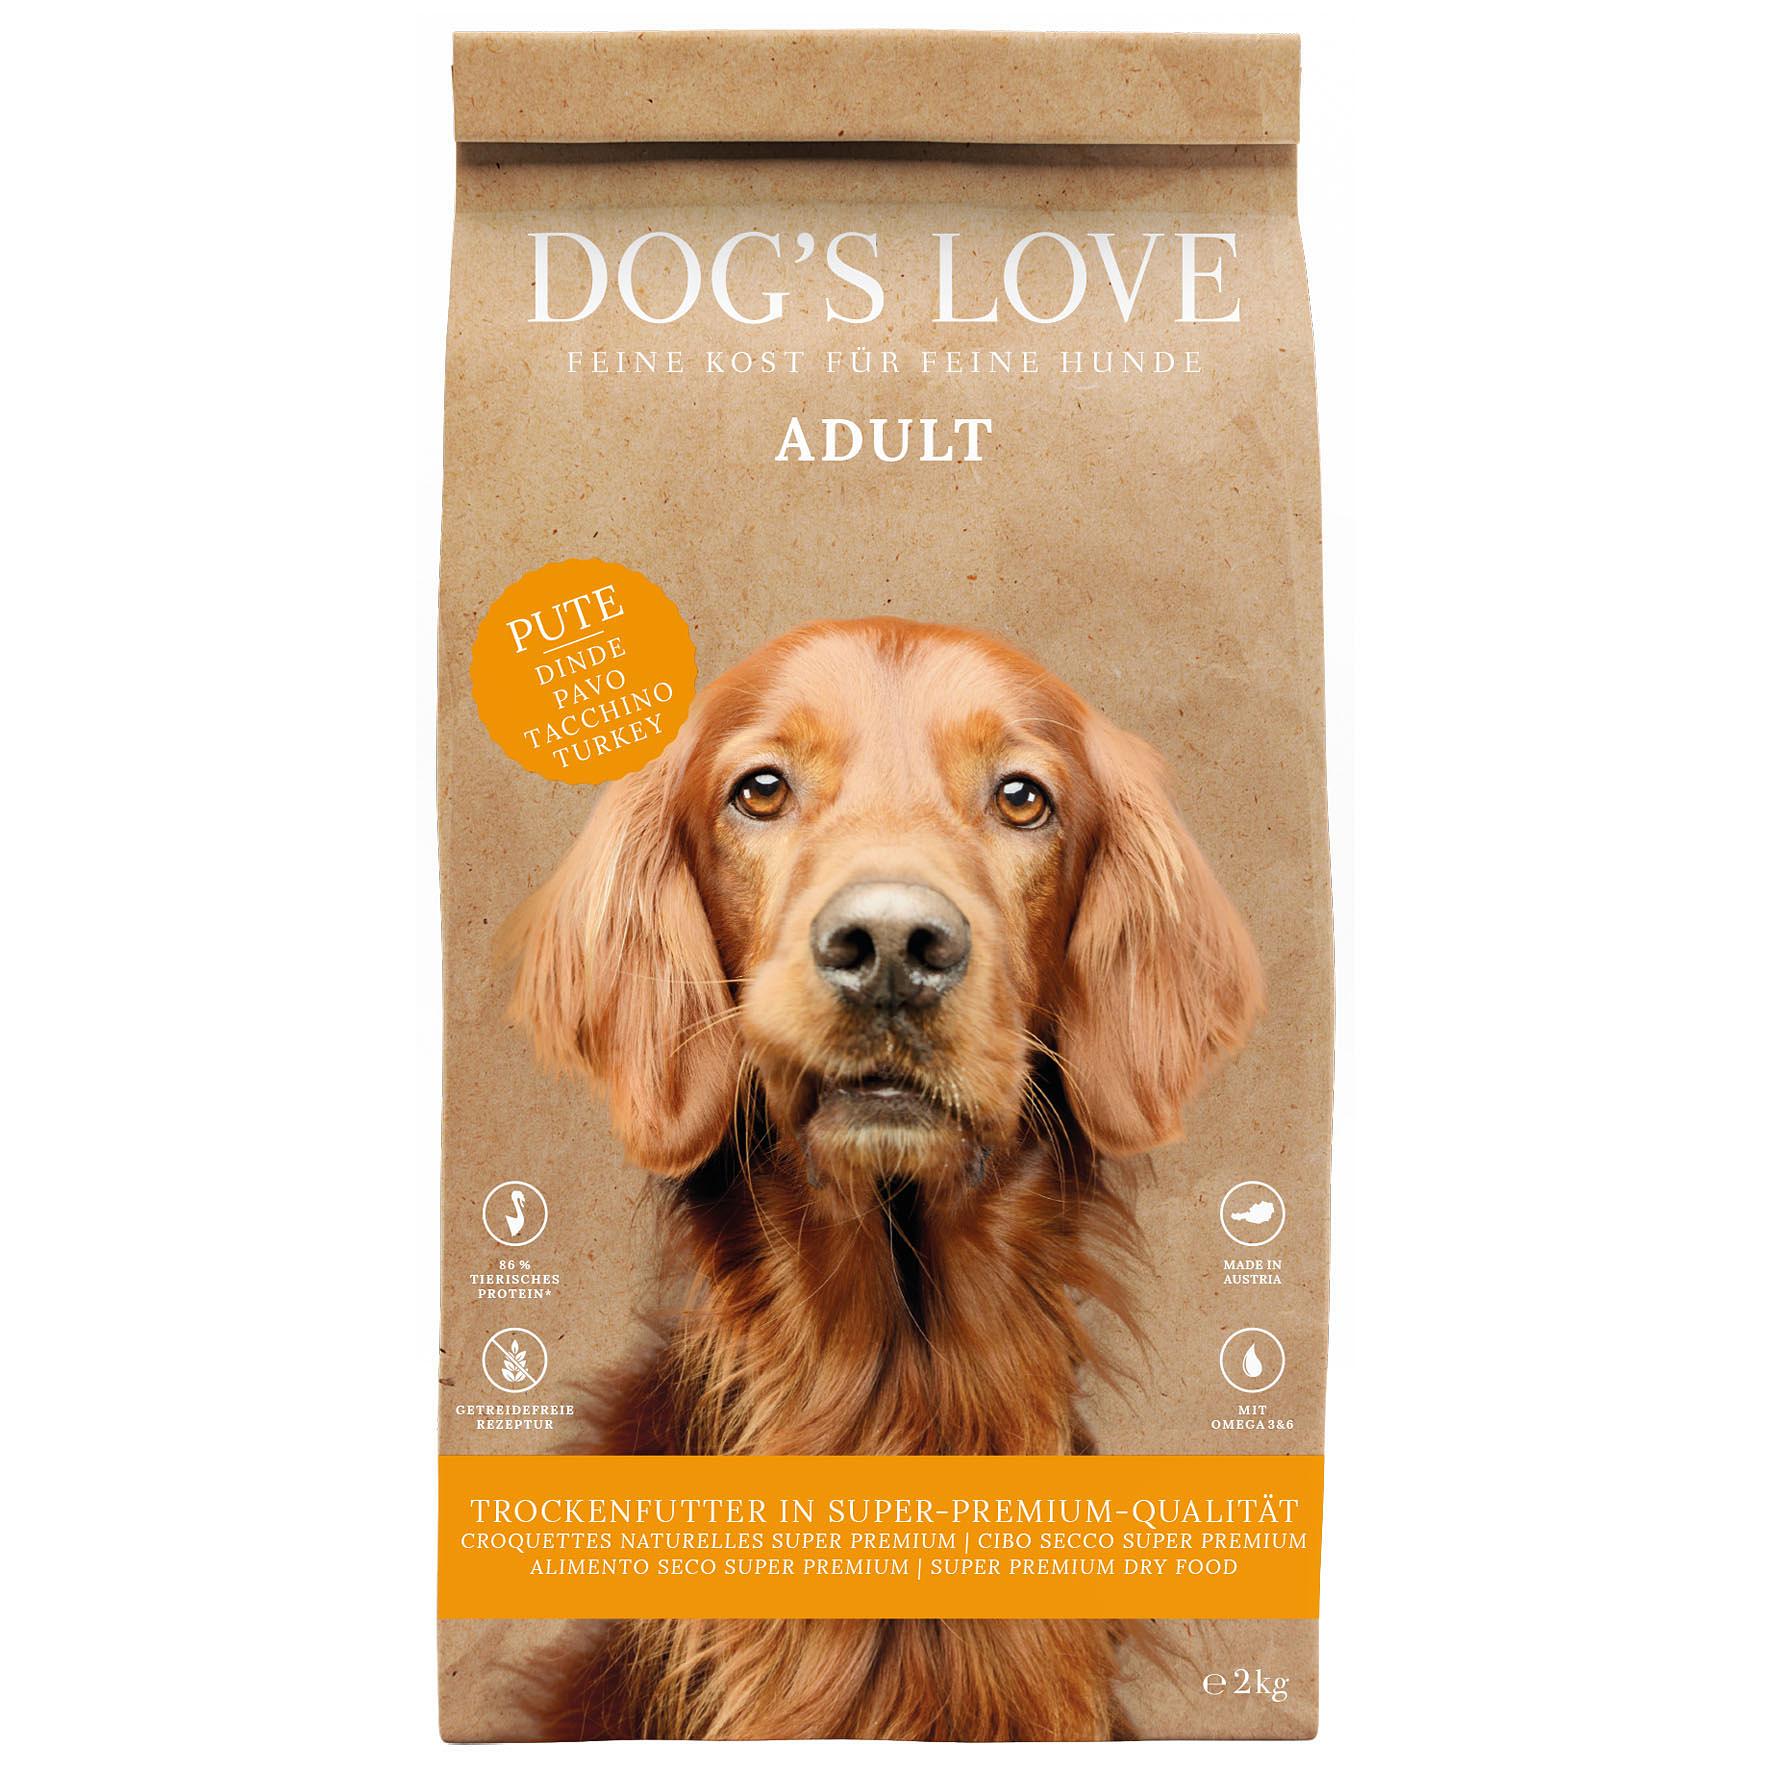 Dog‘s Love Adult dinde, patate douce & canneberges